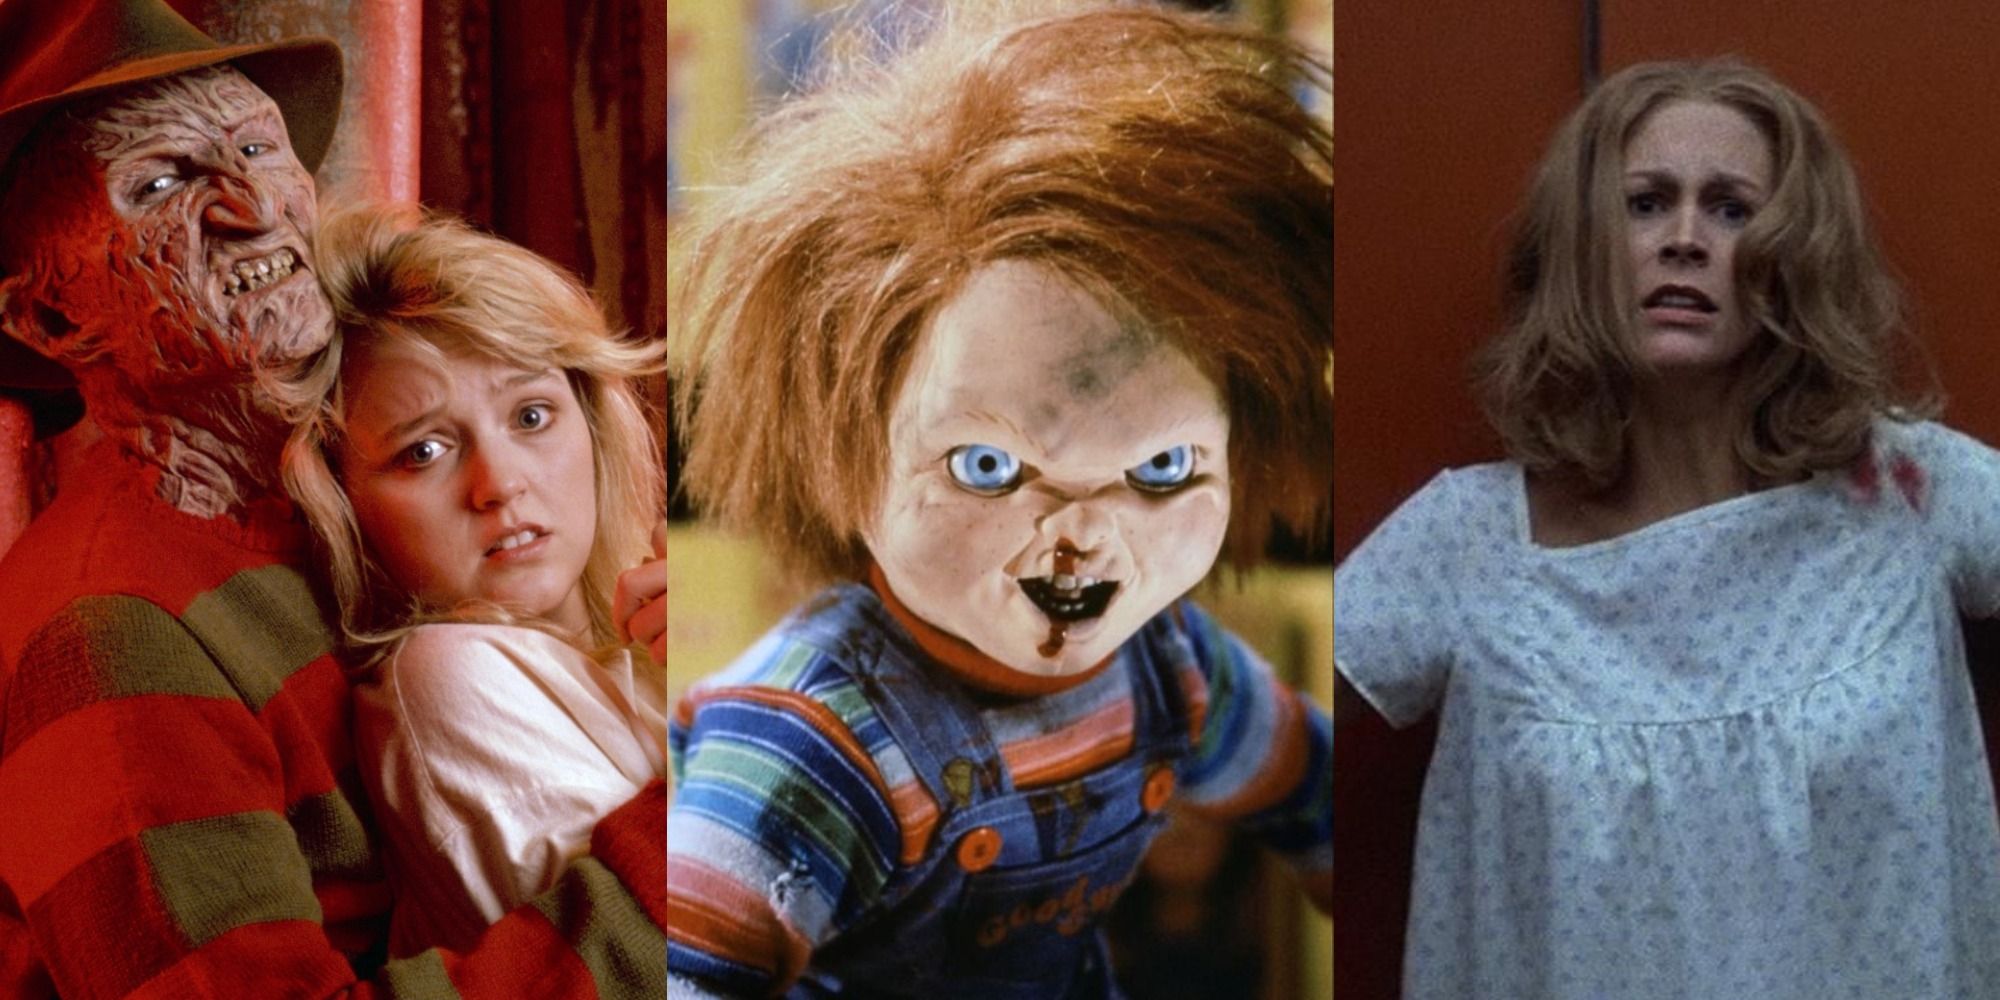 Stills from A Nightmare On Elm Street 4, Child's Play, and Halloween II